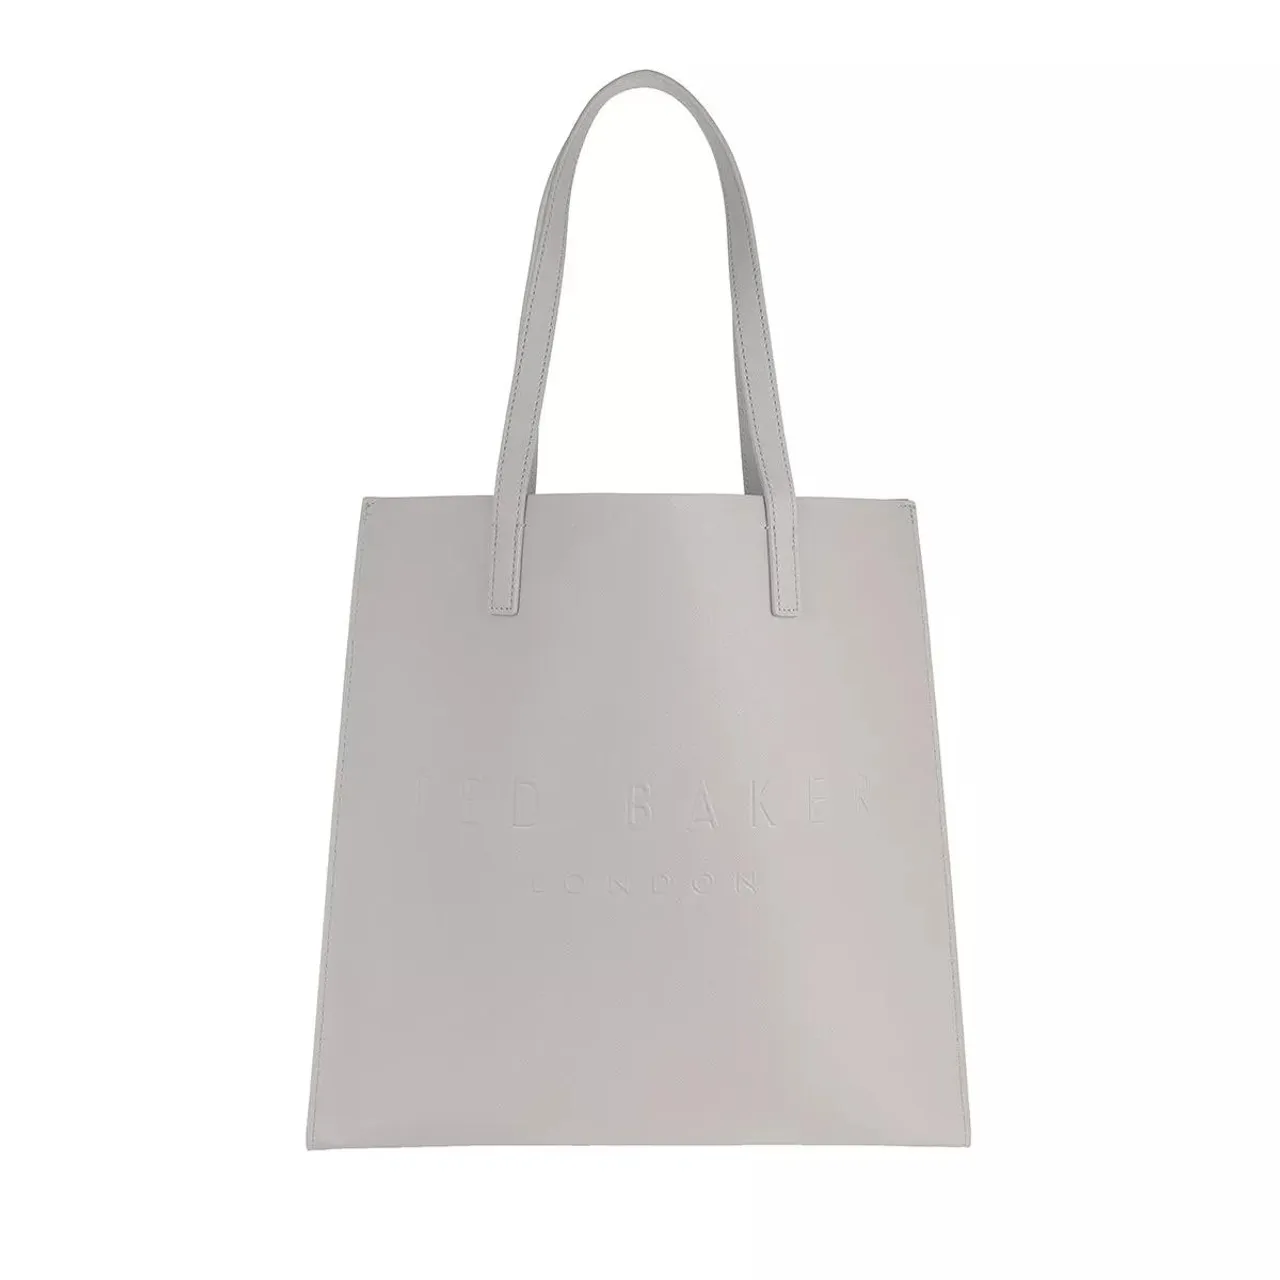 Ted Baker Shopping Bags - Soocon Crosshatch Large Icon Bag - grey - Shopping Bags for ladies